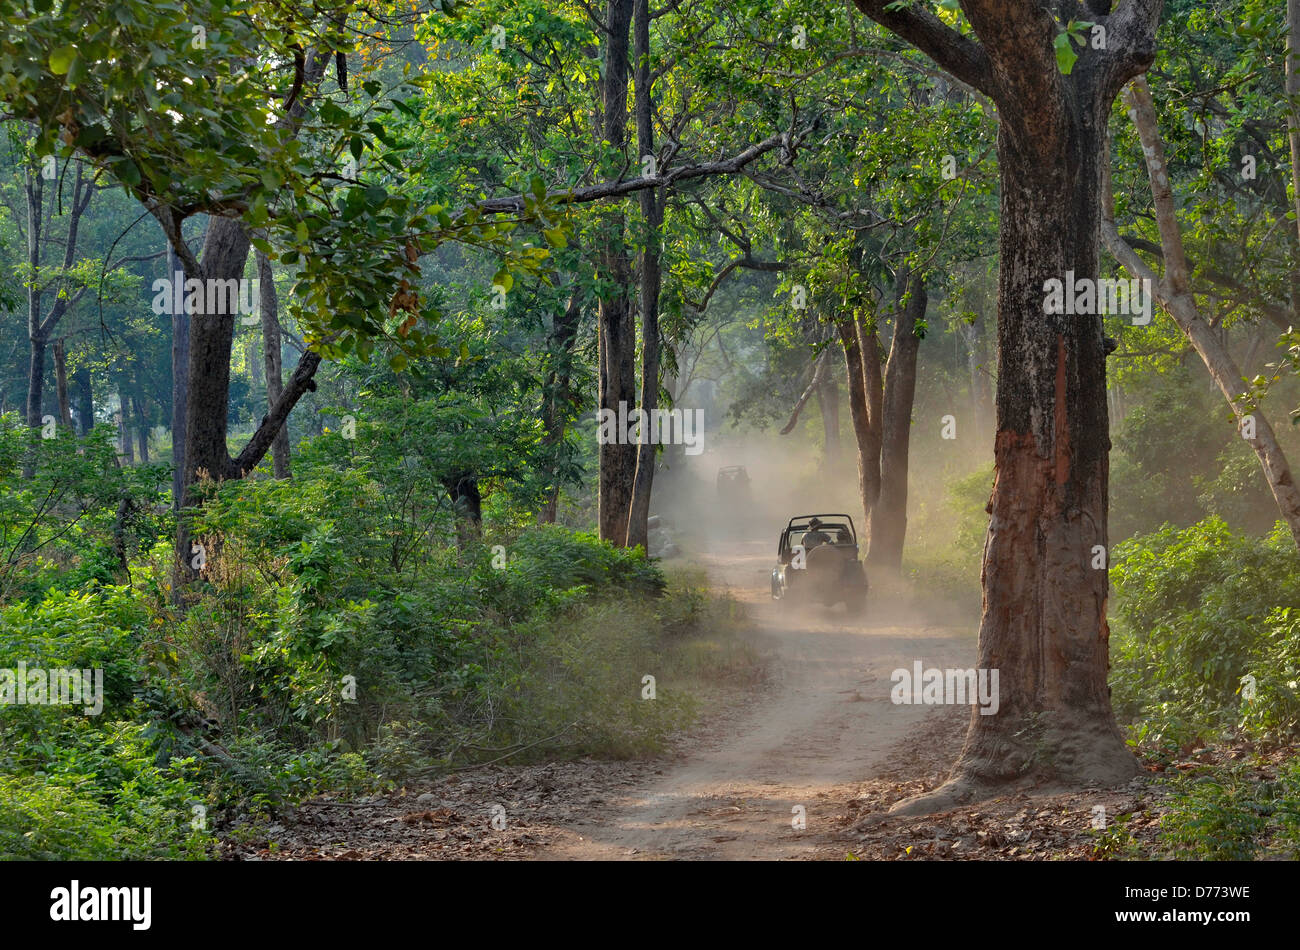 India Uttarakhand state Corbett National Park off road vehicle ride in the forest Stock Photo